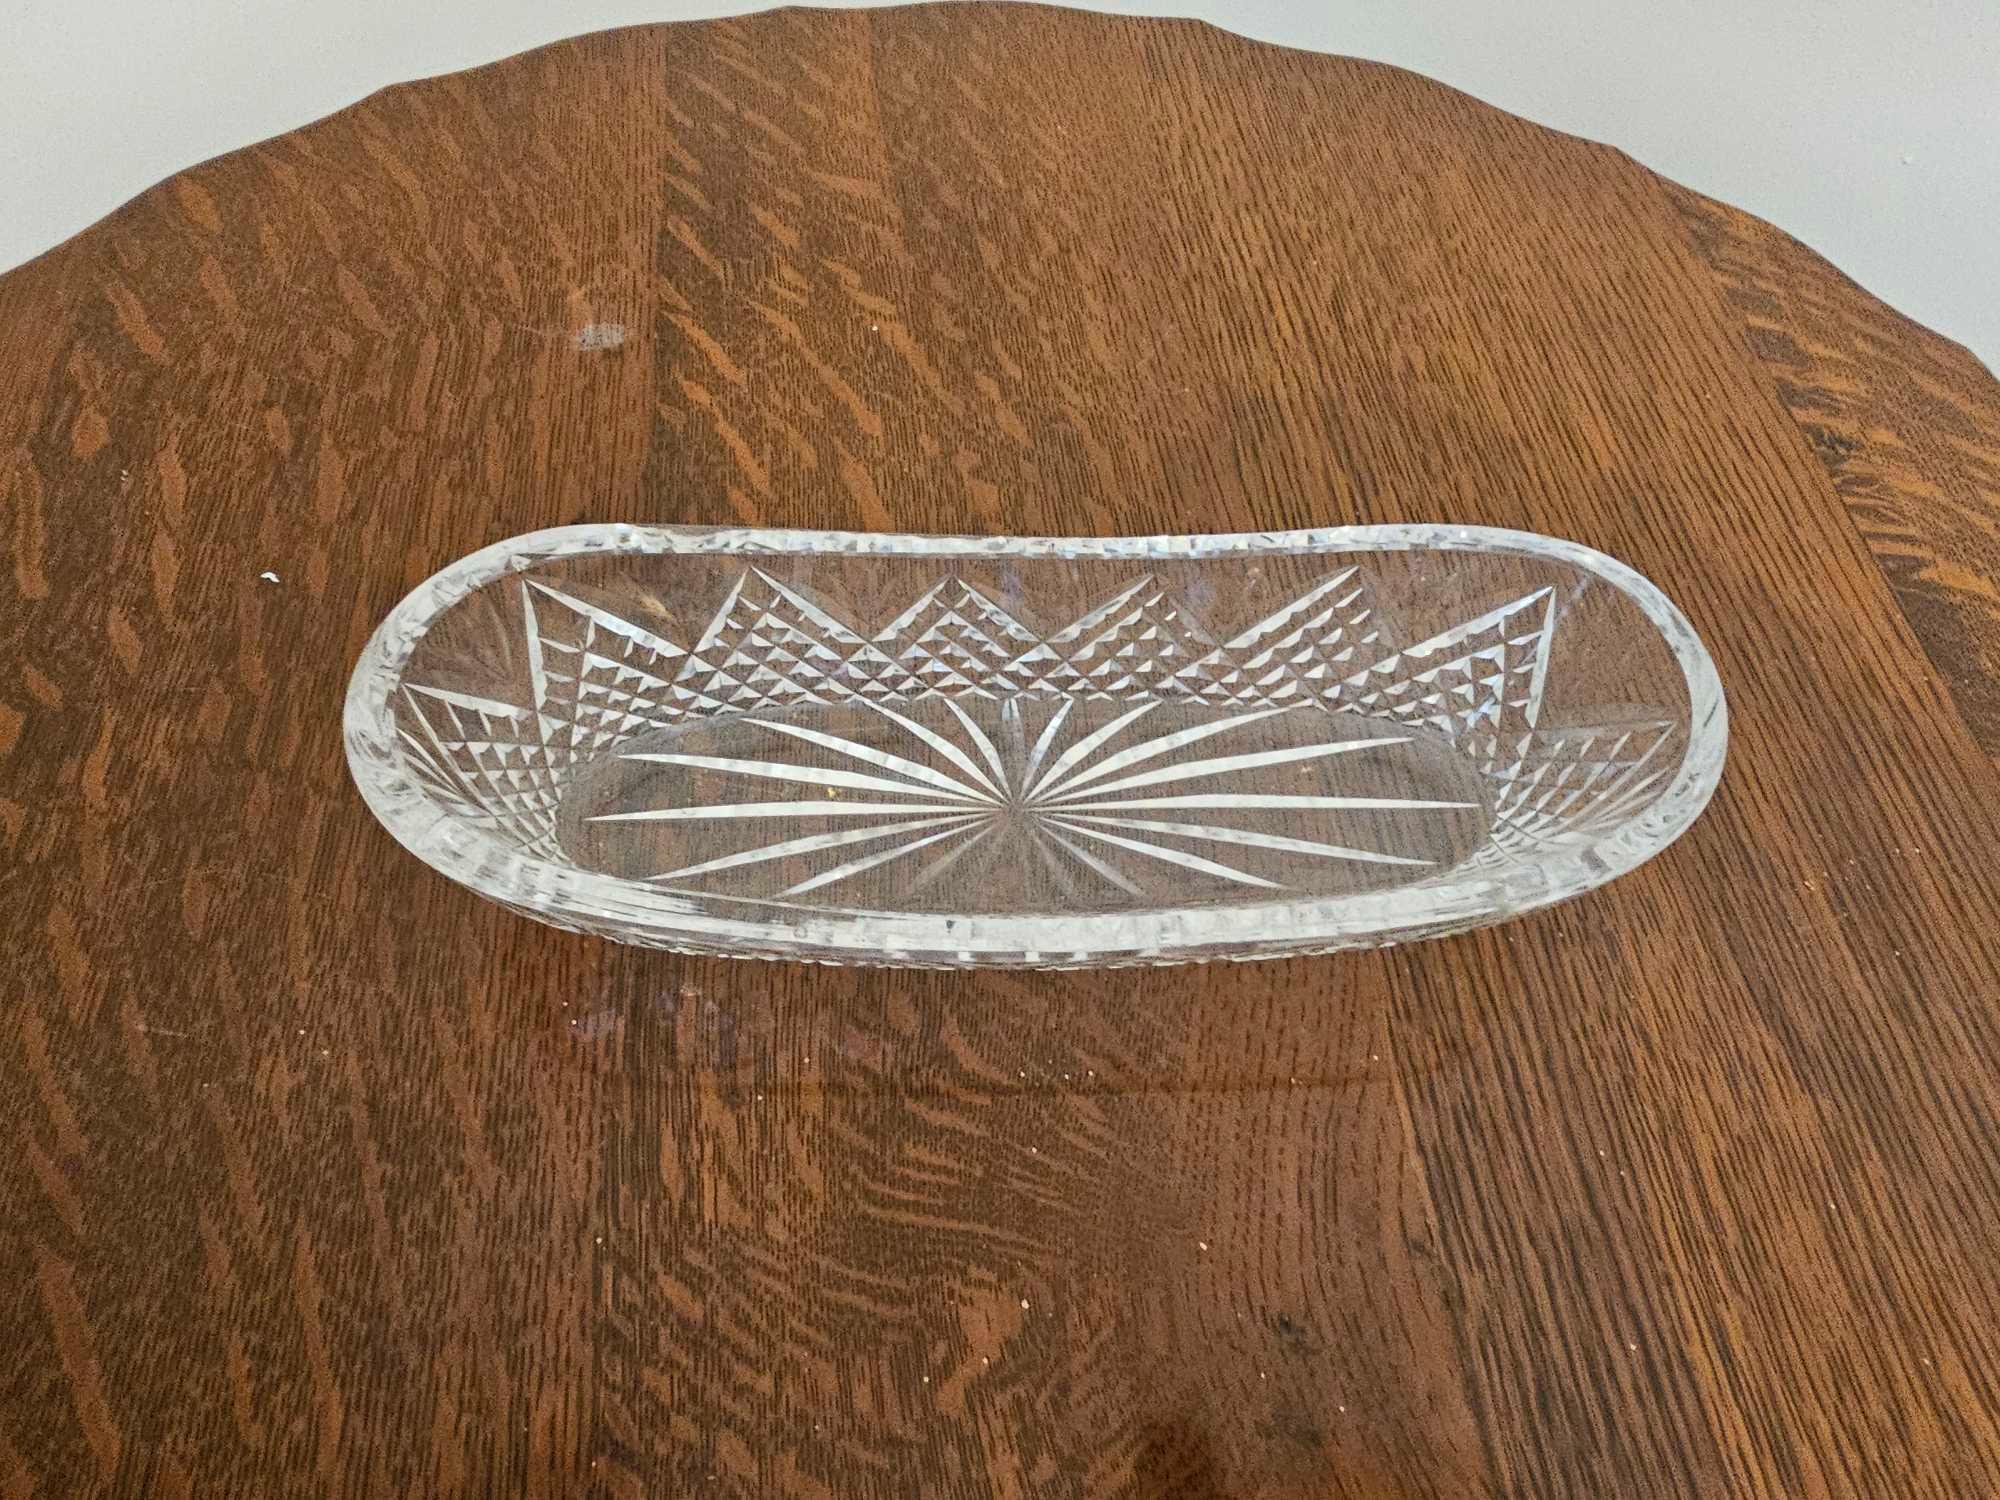 Waterford Crystal Celery Dish 25 X 6cm - Image 3 of 5